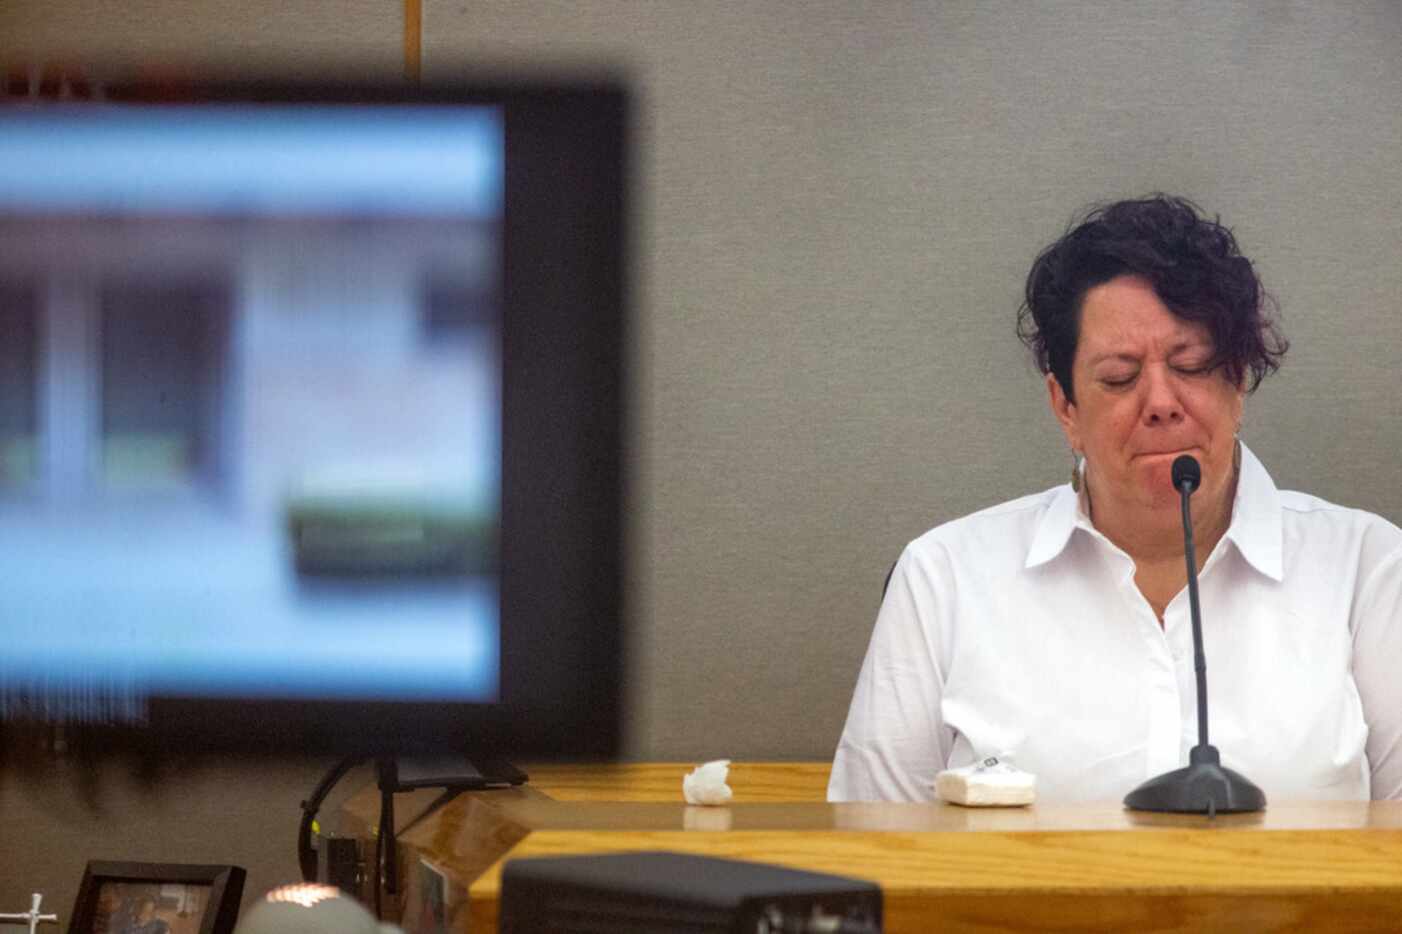 Amy Bascone Autrey pauses to collect herself during her testimony Monday morning.